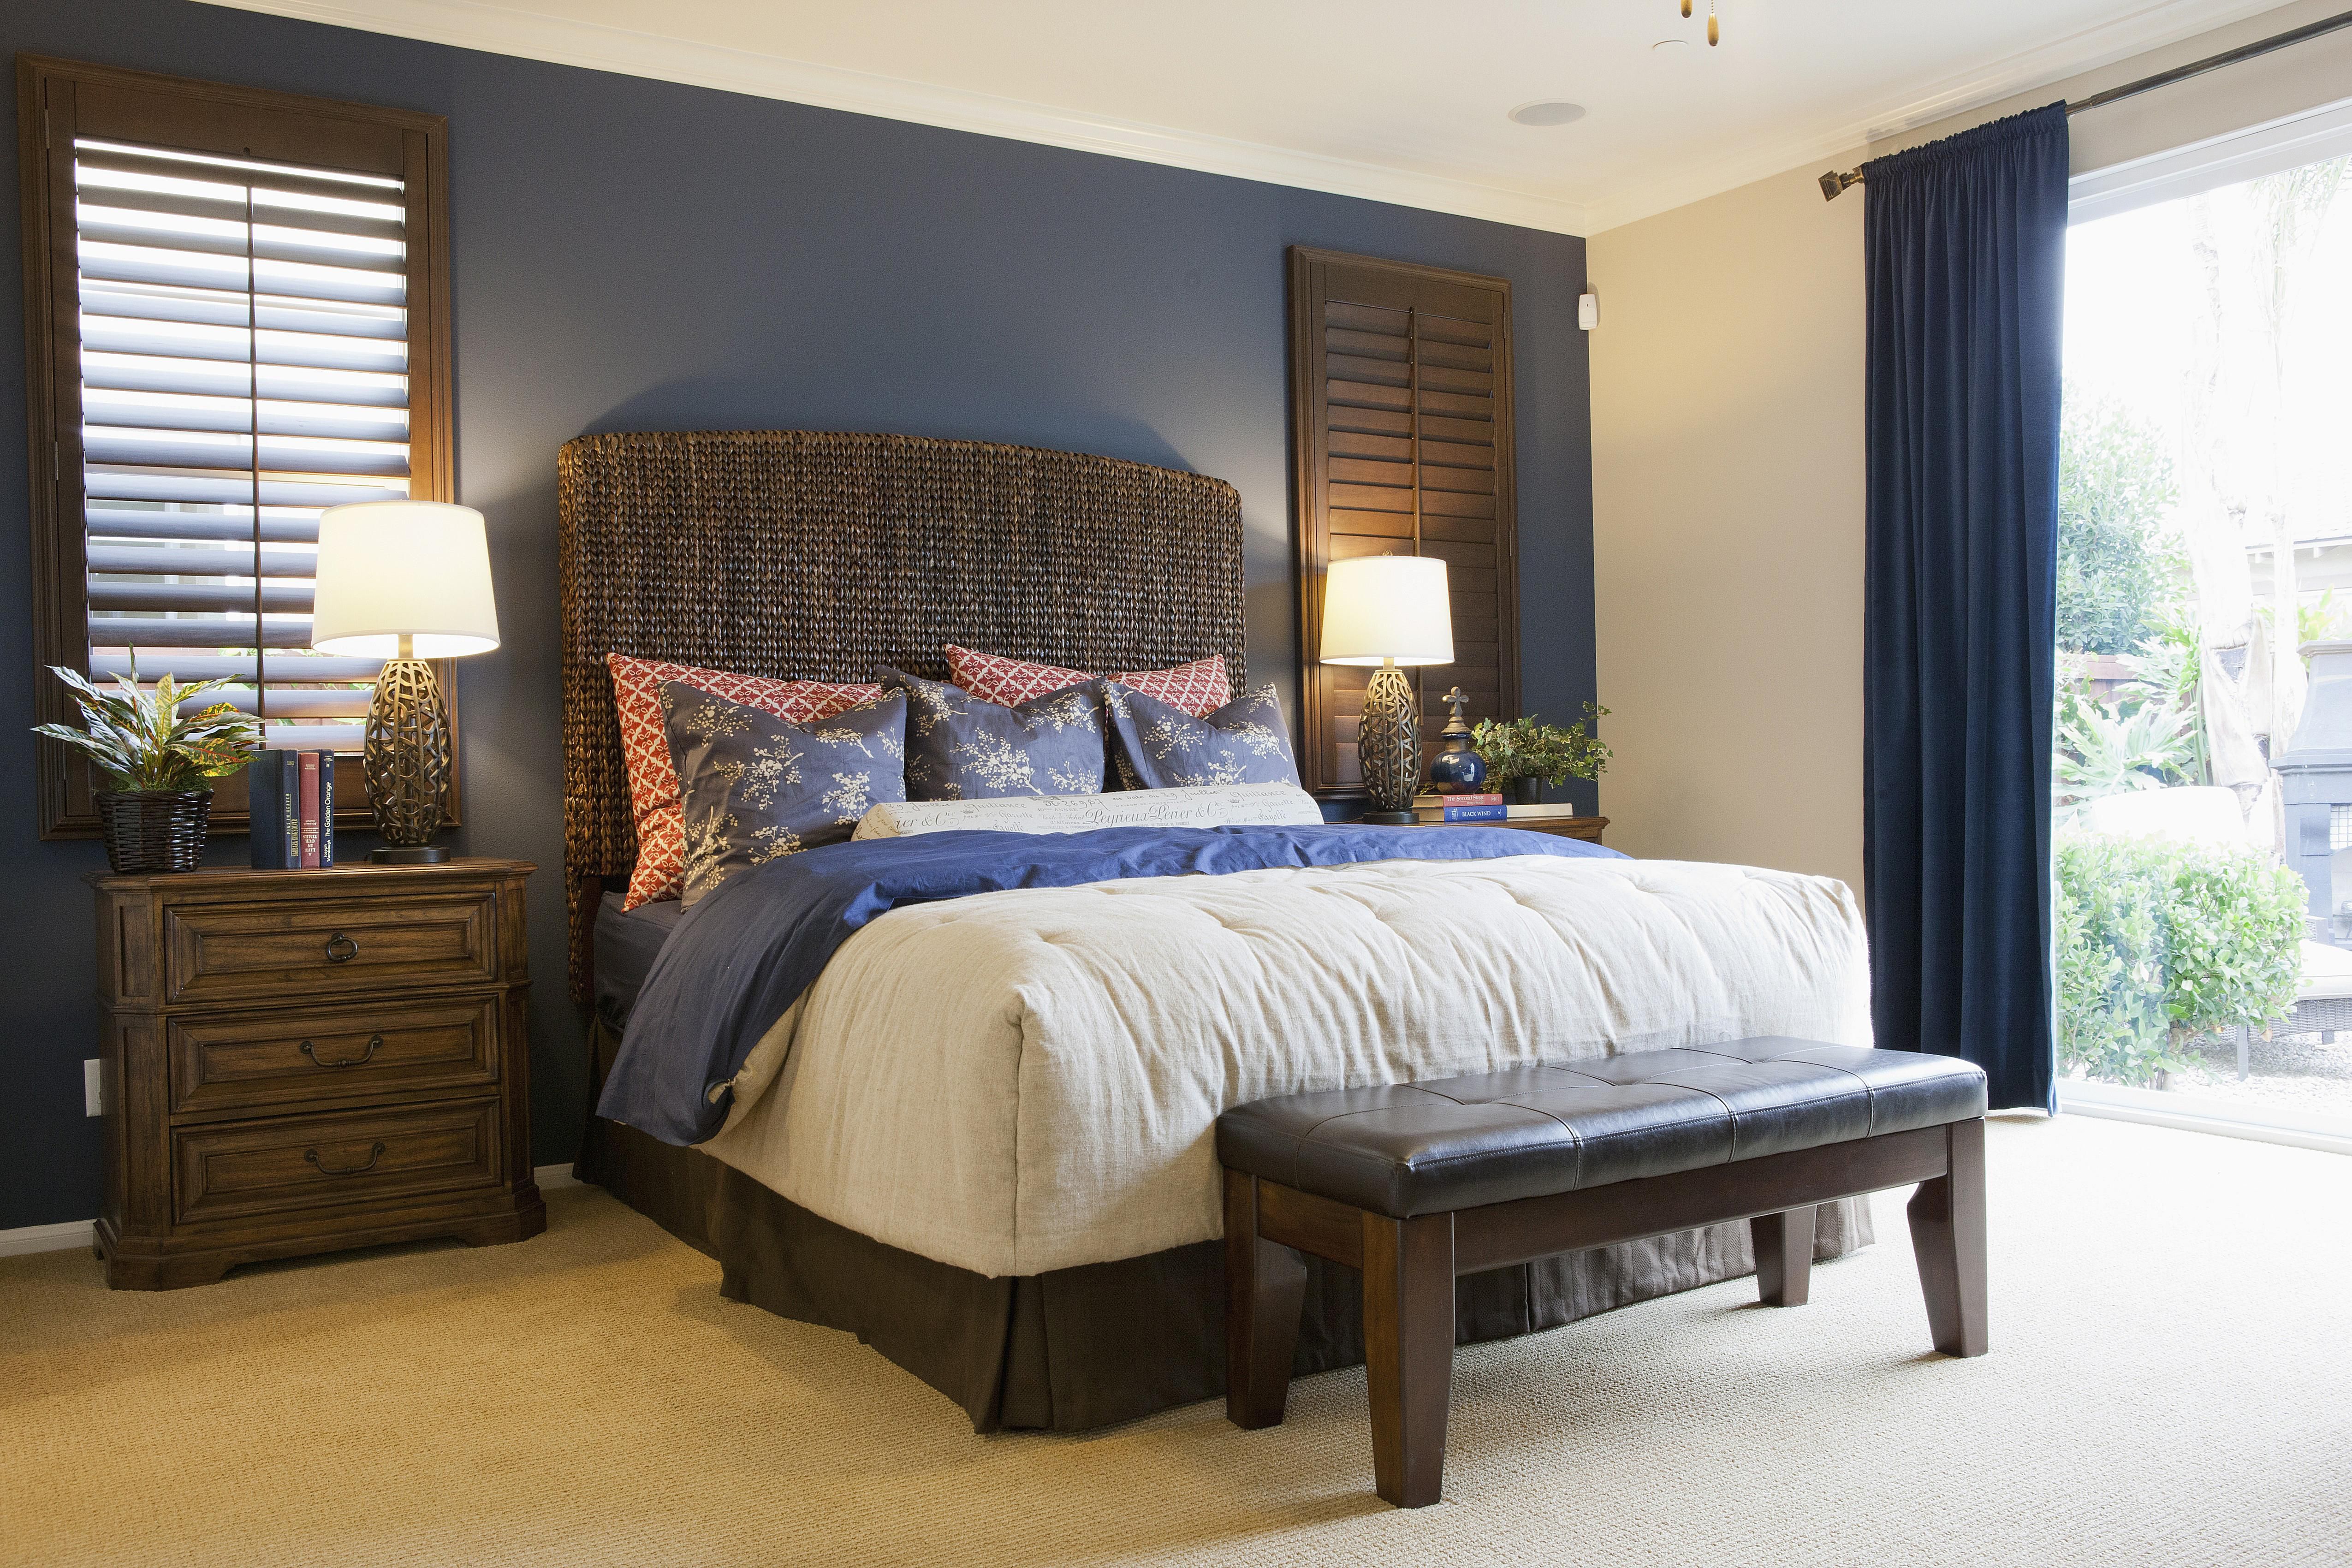 How to Choose an Accent Wall and Color in a Bedroom